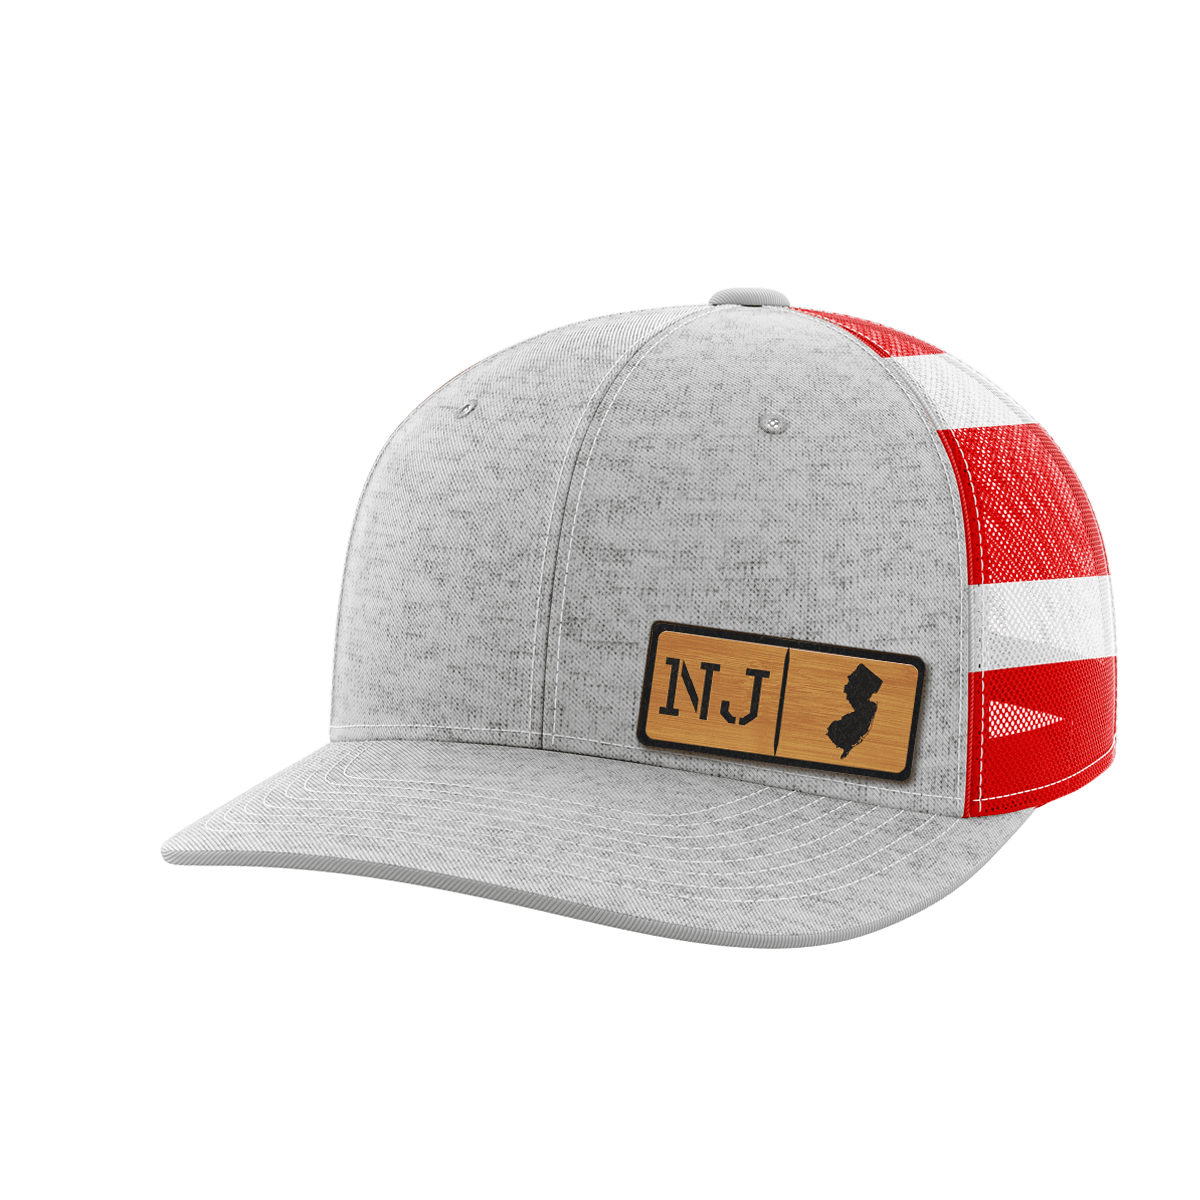 Thumbnail for New Jersey Homegrown Hats - Greater Half